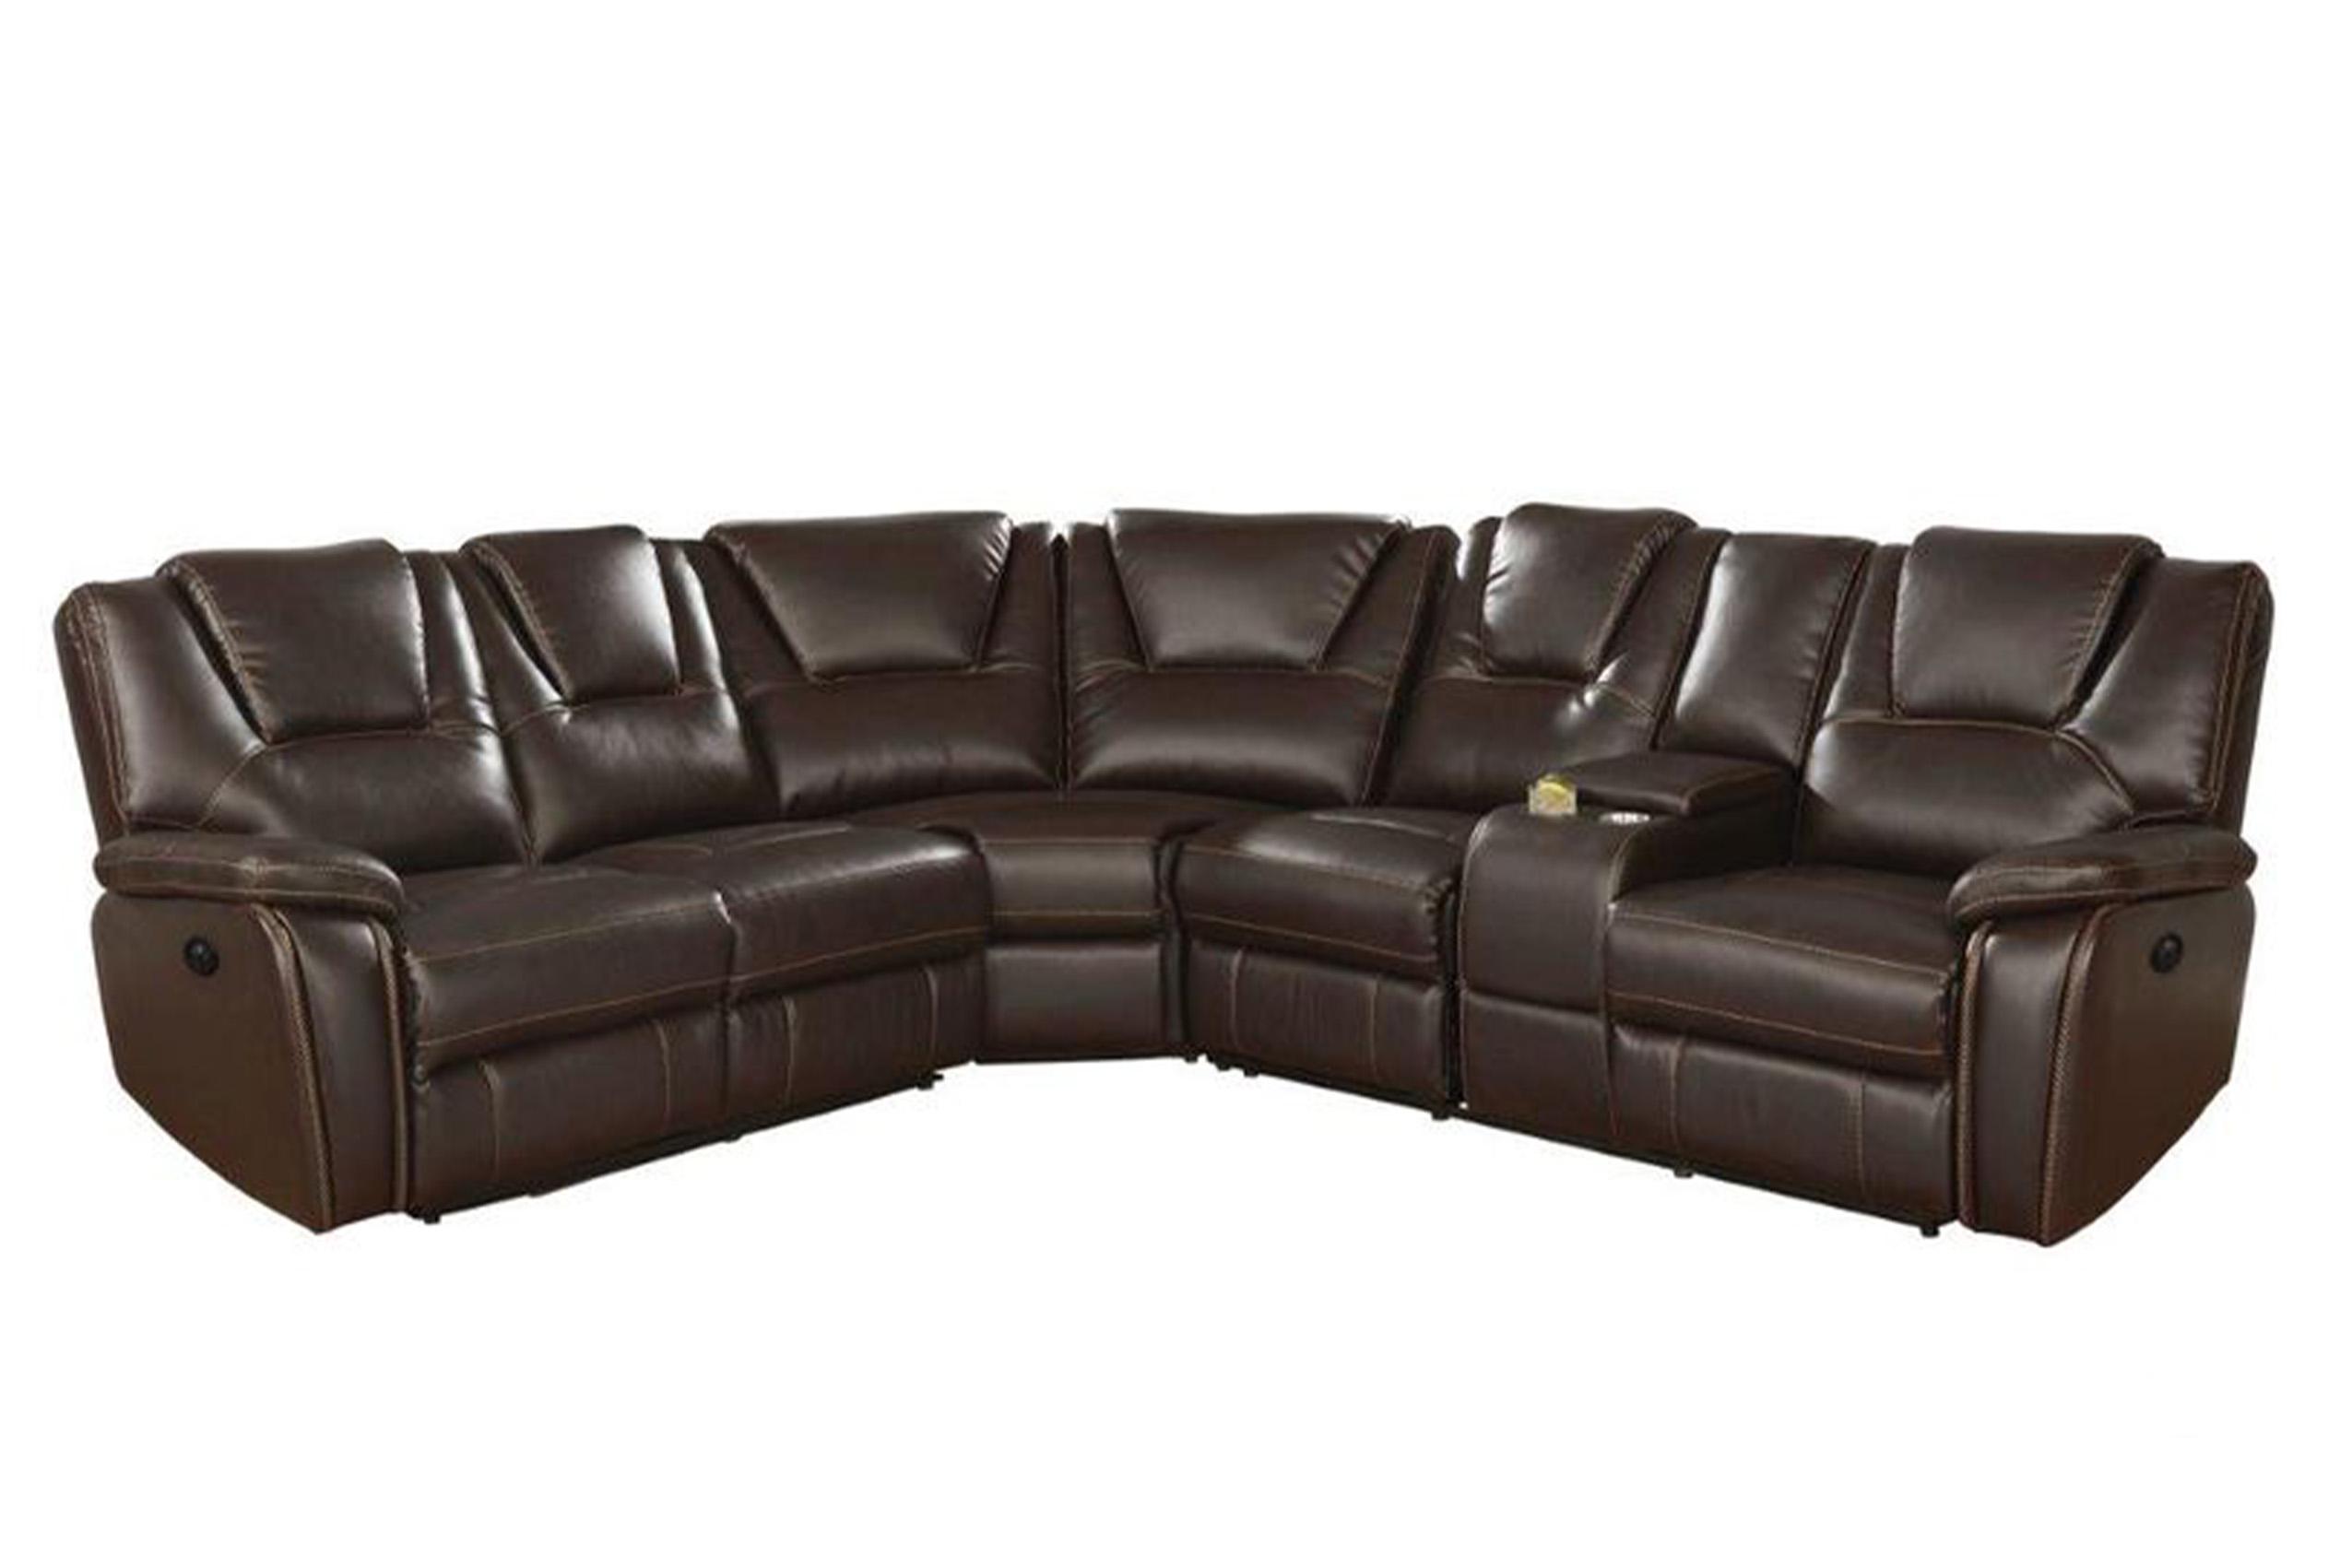 Contemporary, Modern Reclining Sectional Hong Kong QB13318051 in Brown Eco Leather